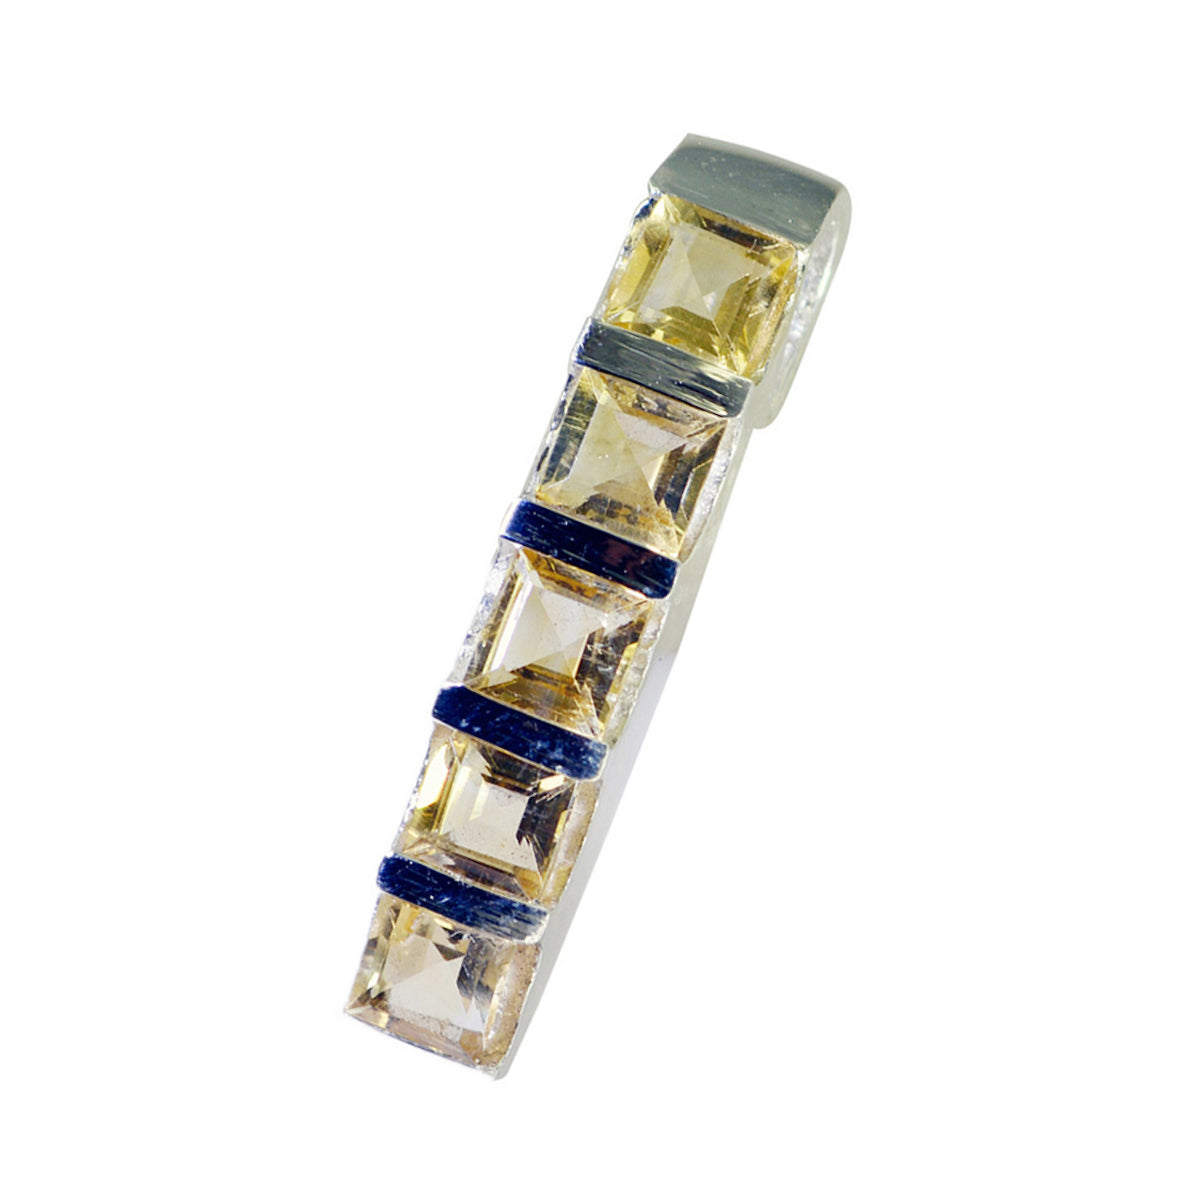 Riyo Bonny Gemstone Square Faceted Yellow Citrine Sterling Silver Pendant Gift For Christmas